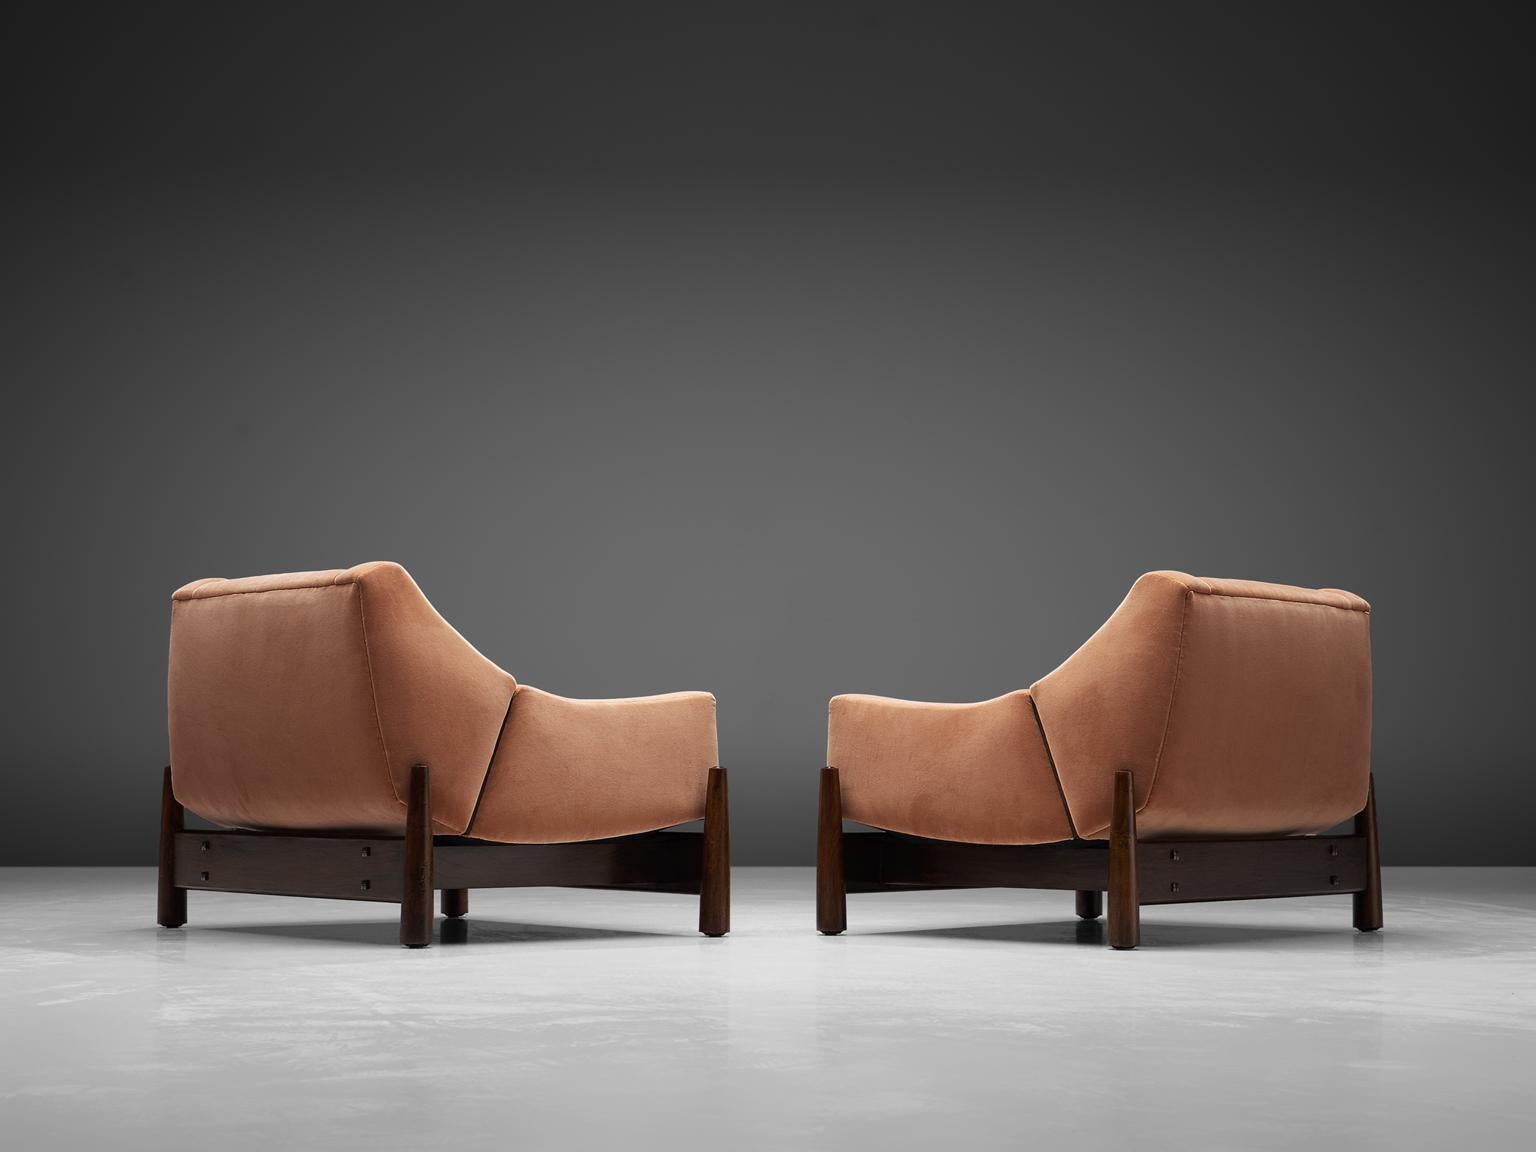 Móveis Cimo, pair of lounge chairs, rosewood and fabric, Brazil, 1950s. 

Fully restored and reupholstered pair of Brazilian lounge chairs, designed by Móveis Cimo. These eye catching club chairs feature an organic shaped seat that rests on the